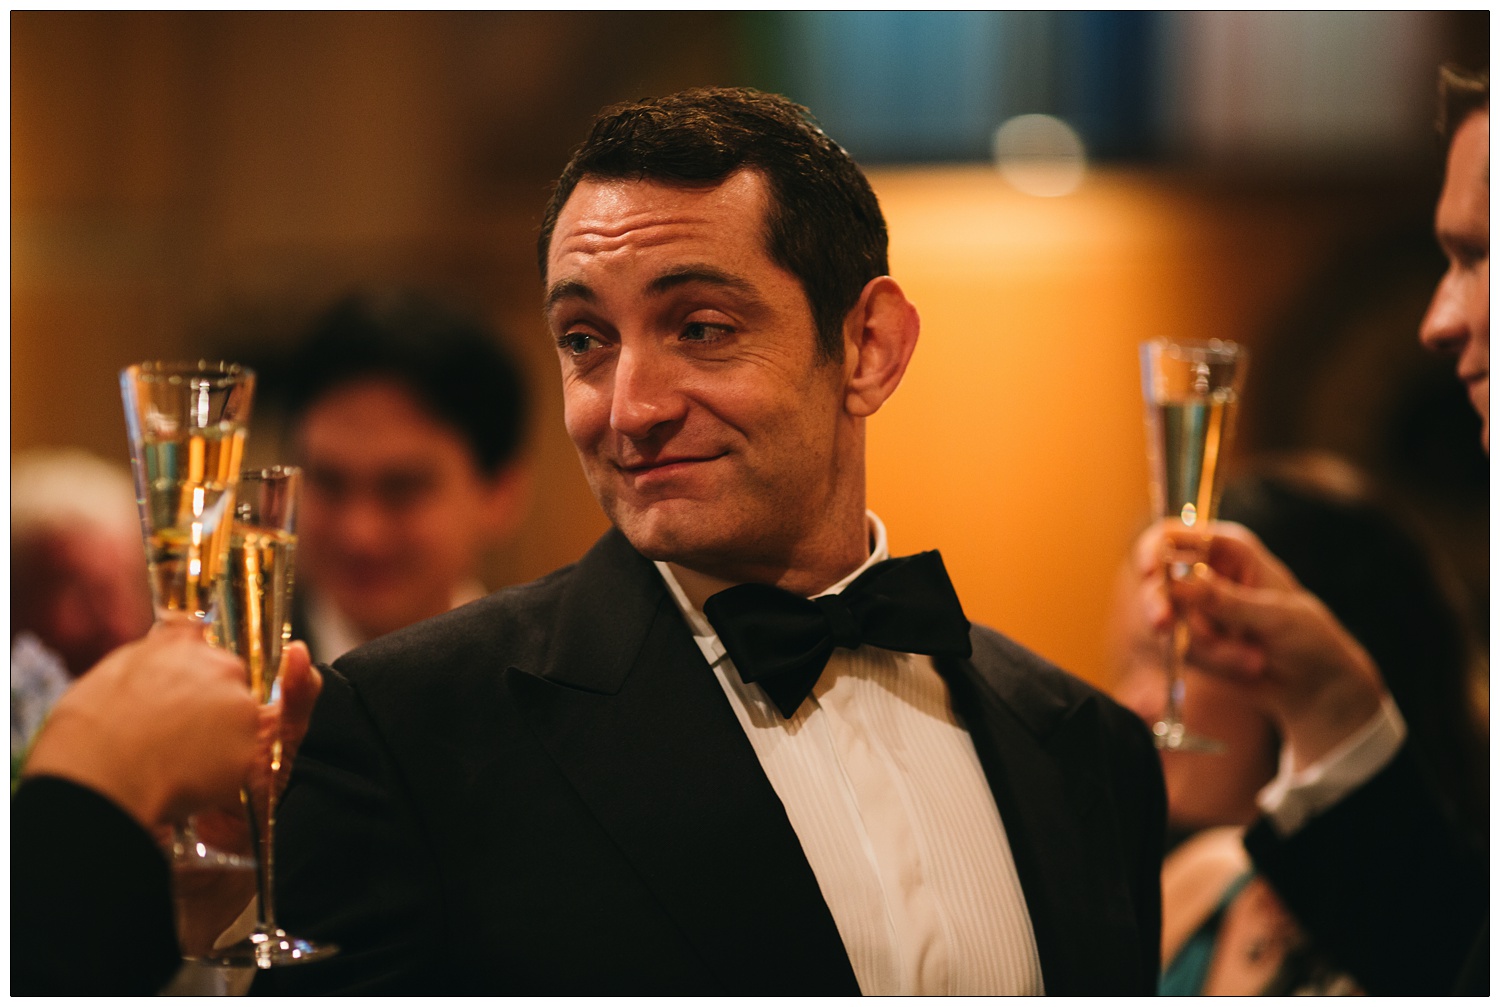 A dapper looking man in a bow tie smiles while people raises their glasses.